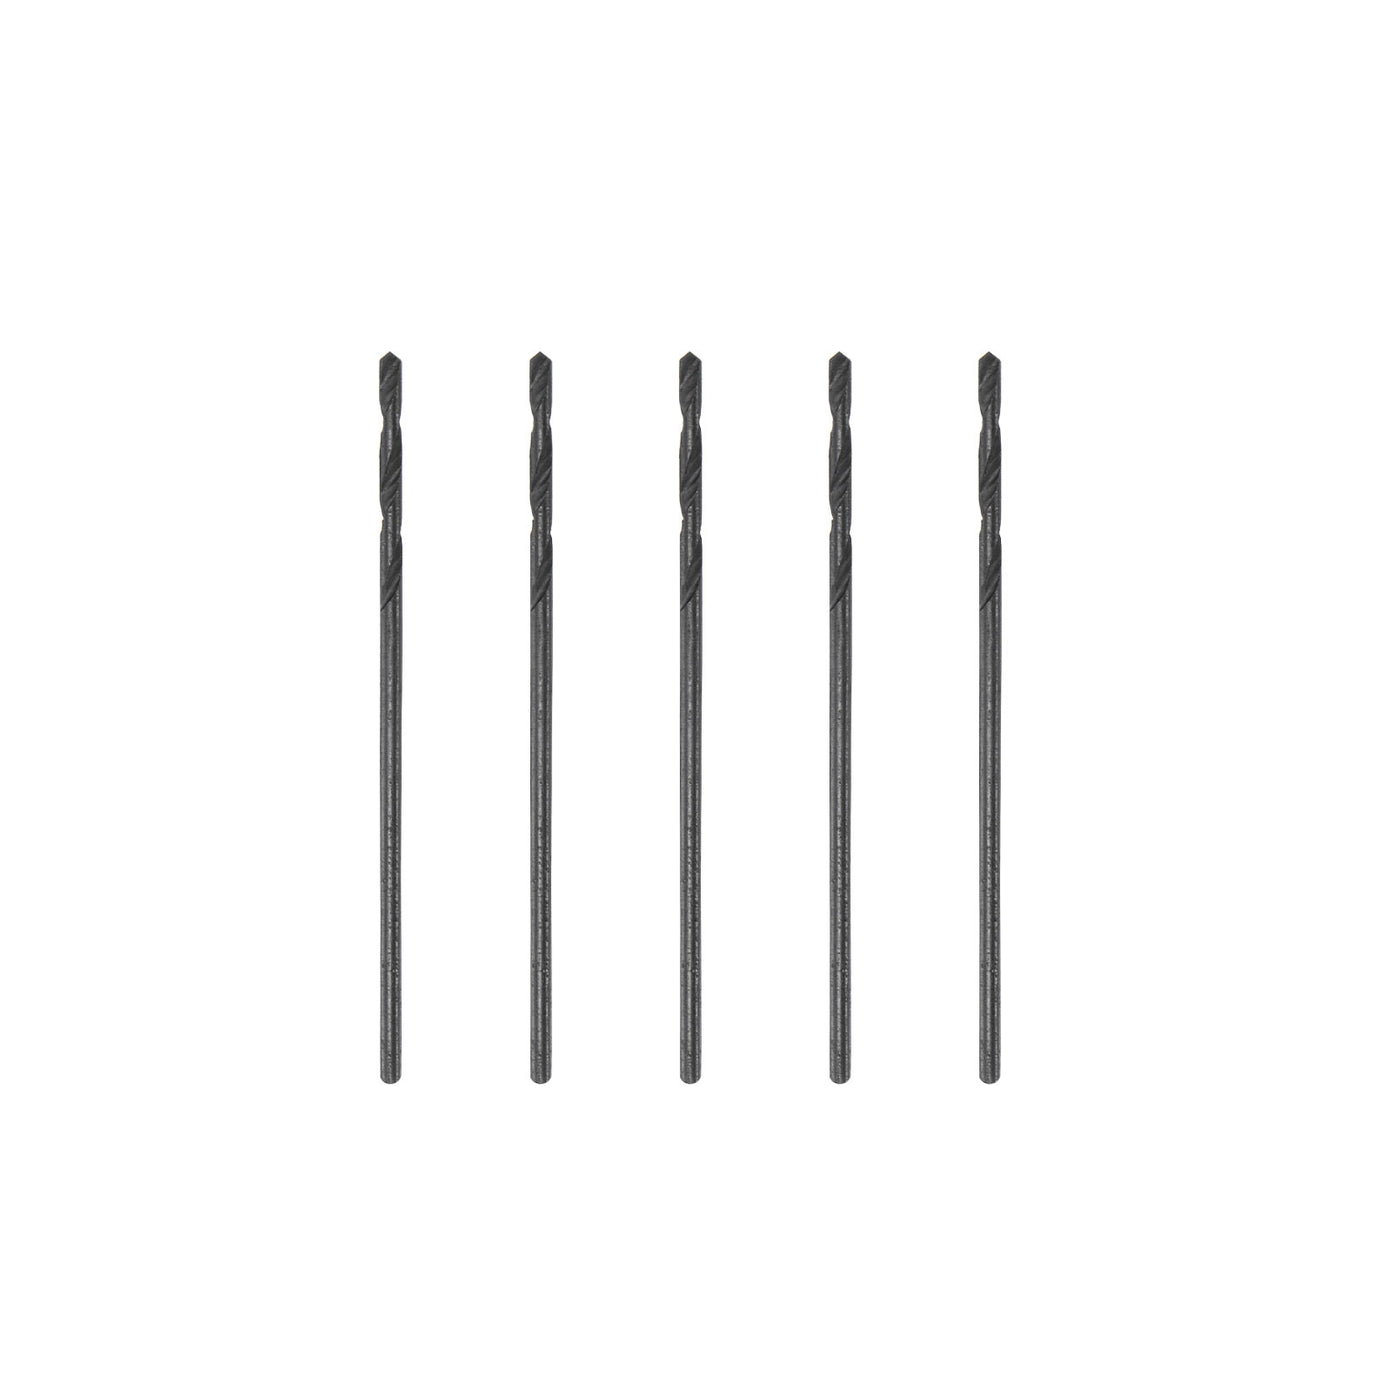 uxcell Uxcell High Speed Steel Twist Drill Bit, 1mm Fully Ground Black Oxide 32mm Long 5Pcs